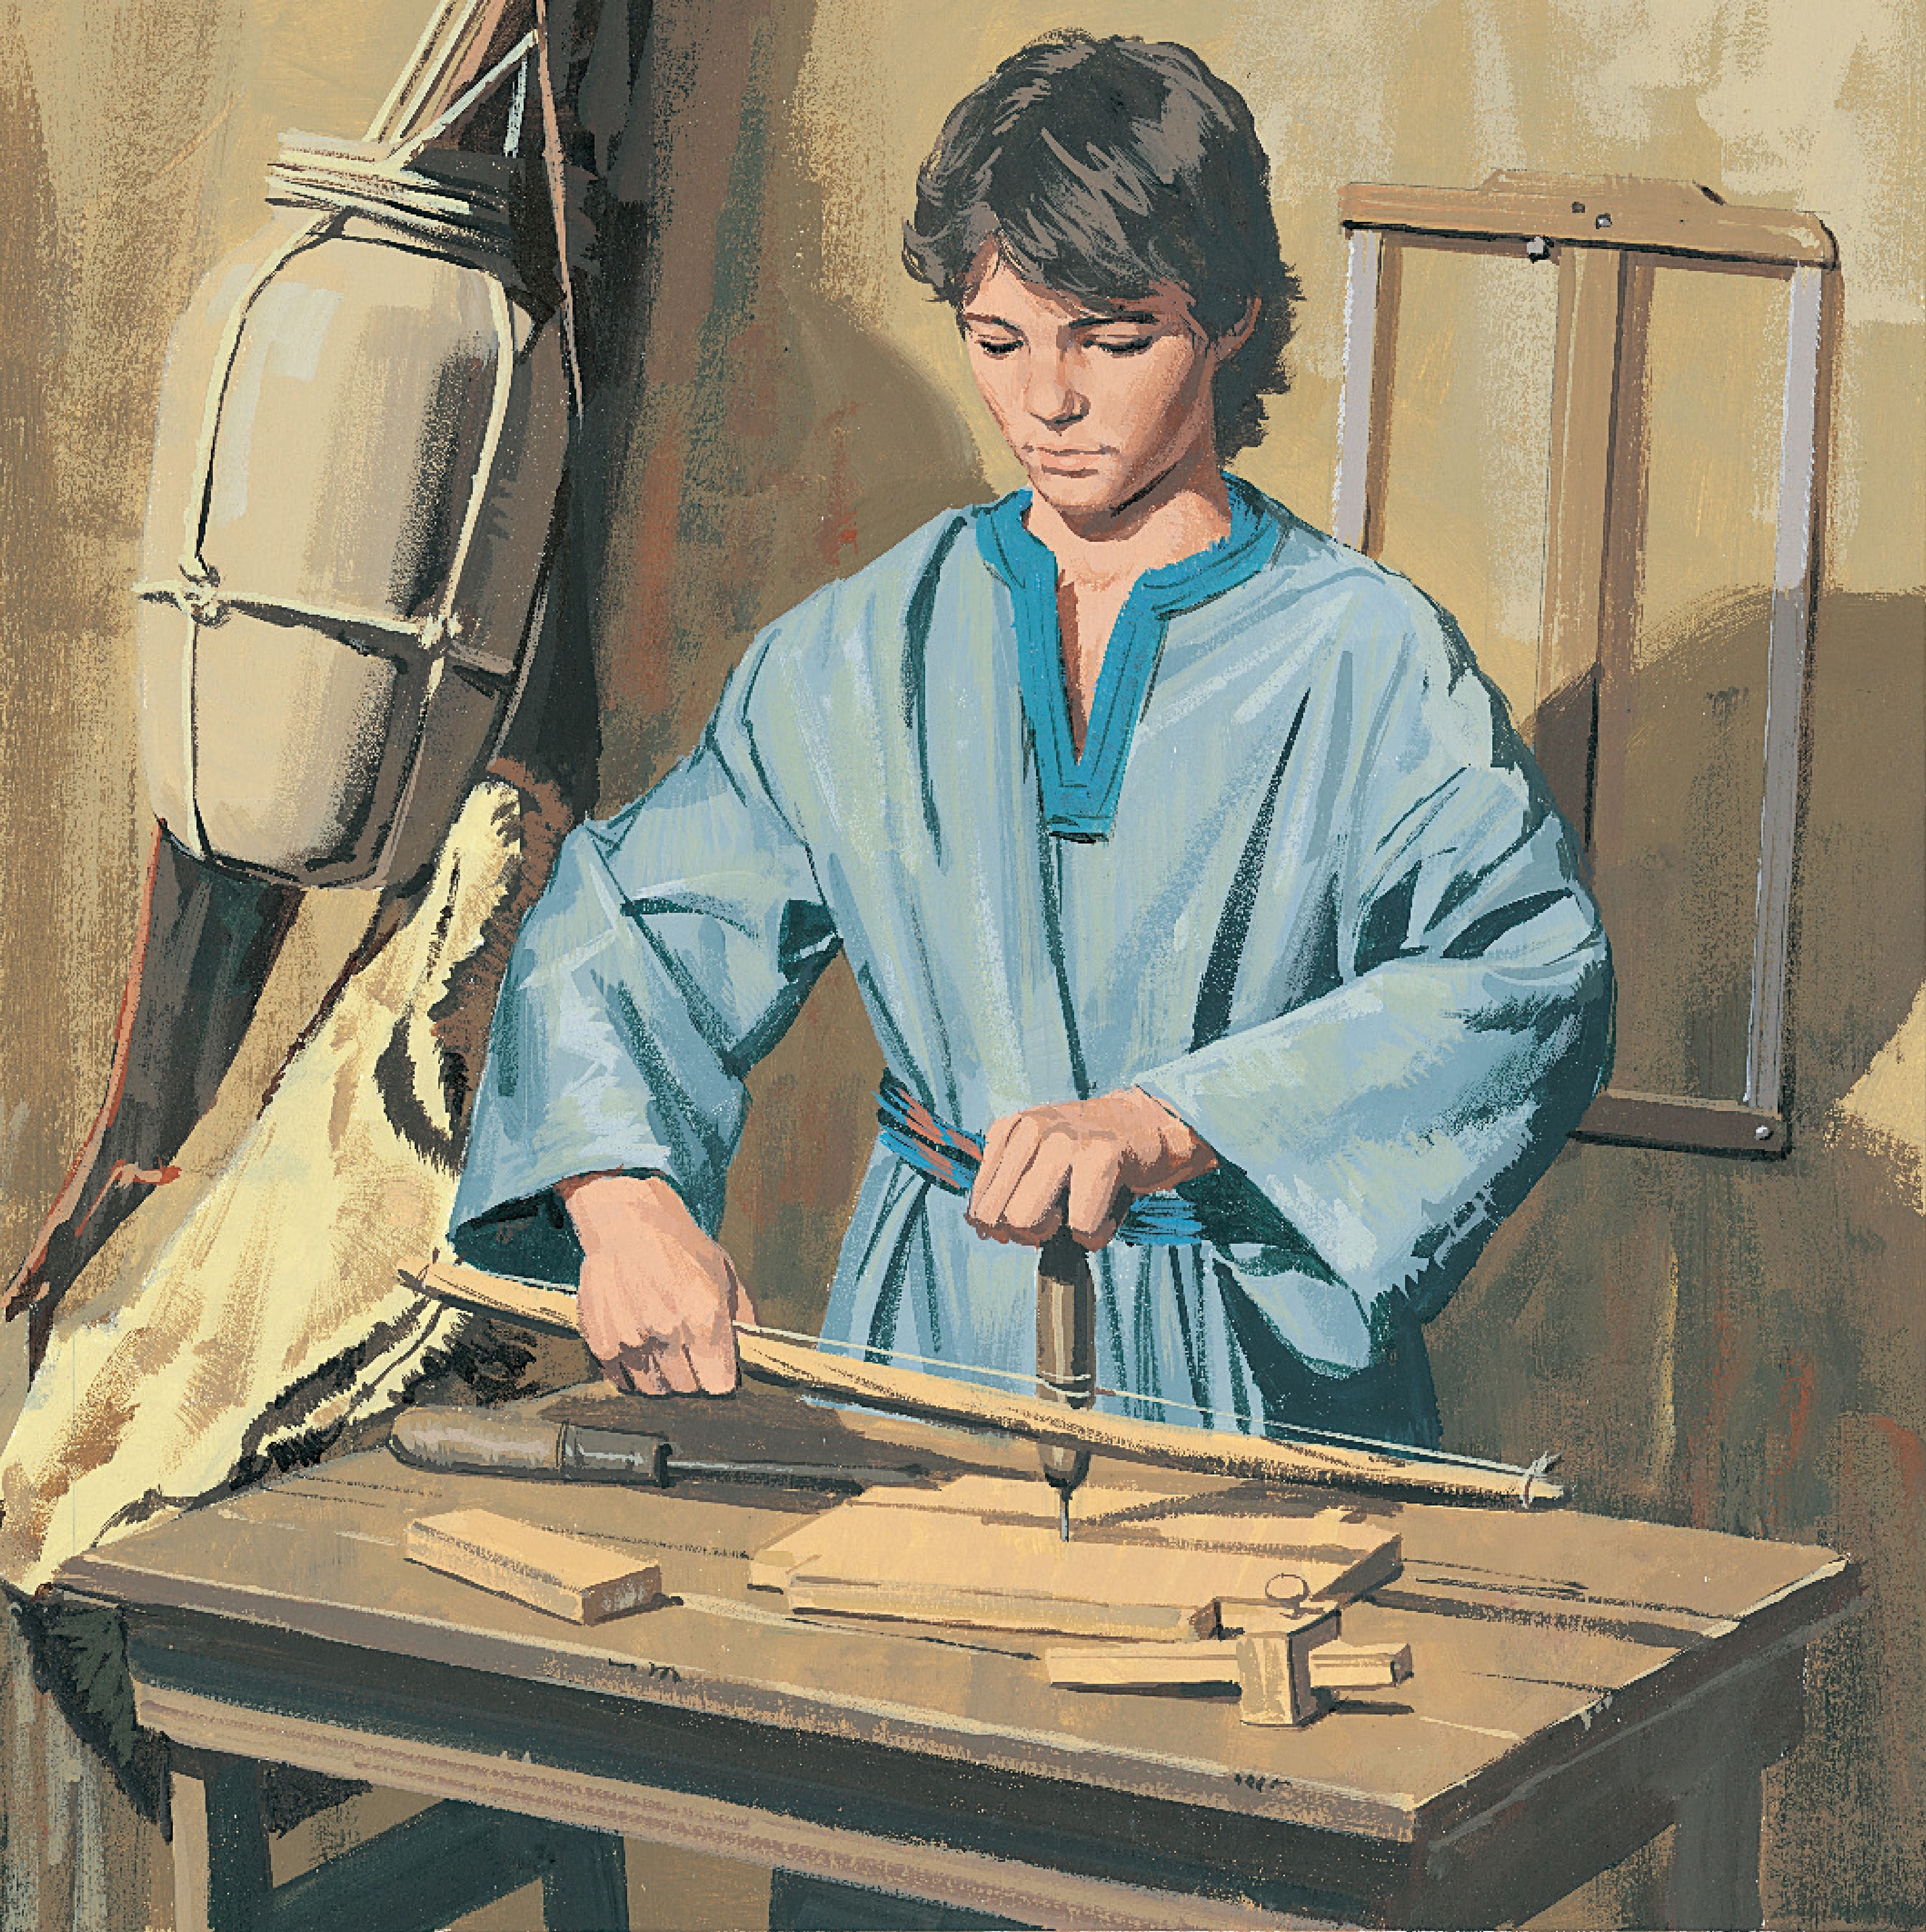 An illustration of Christ as He learns carpentry.